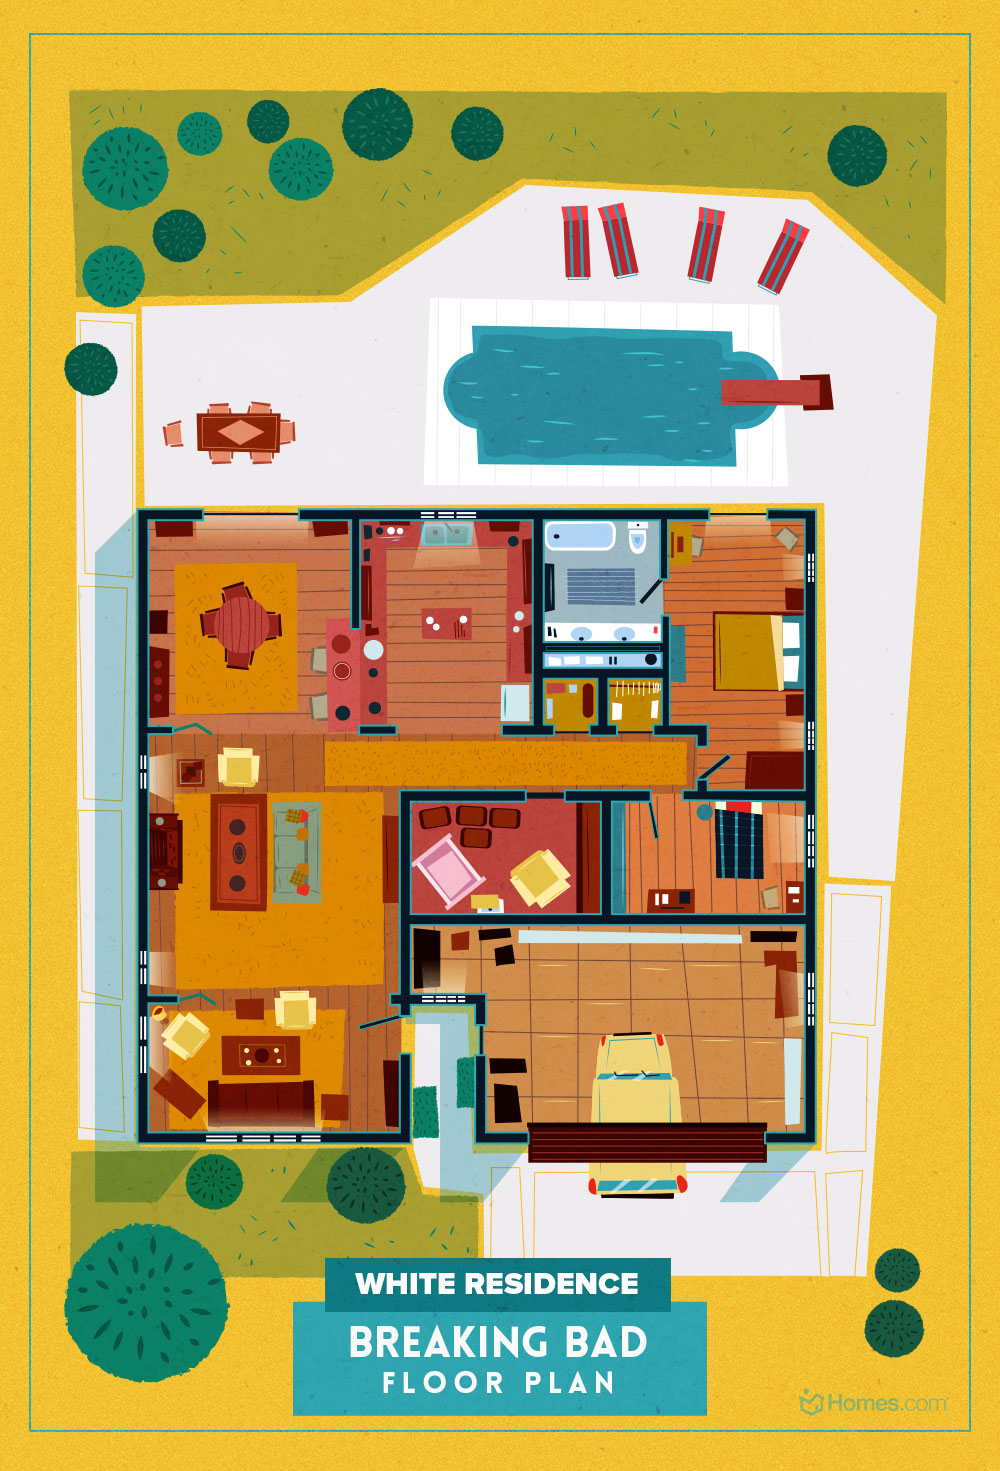 Check Out The Floor Plans For The Homes Of Popular TV Shows